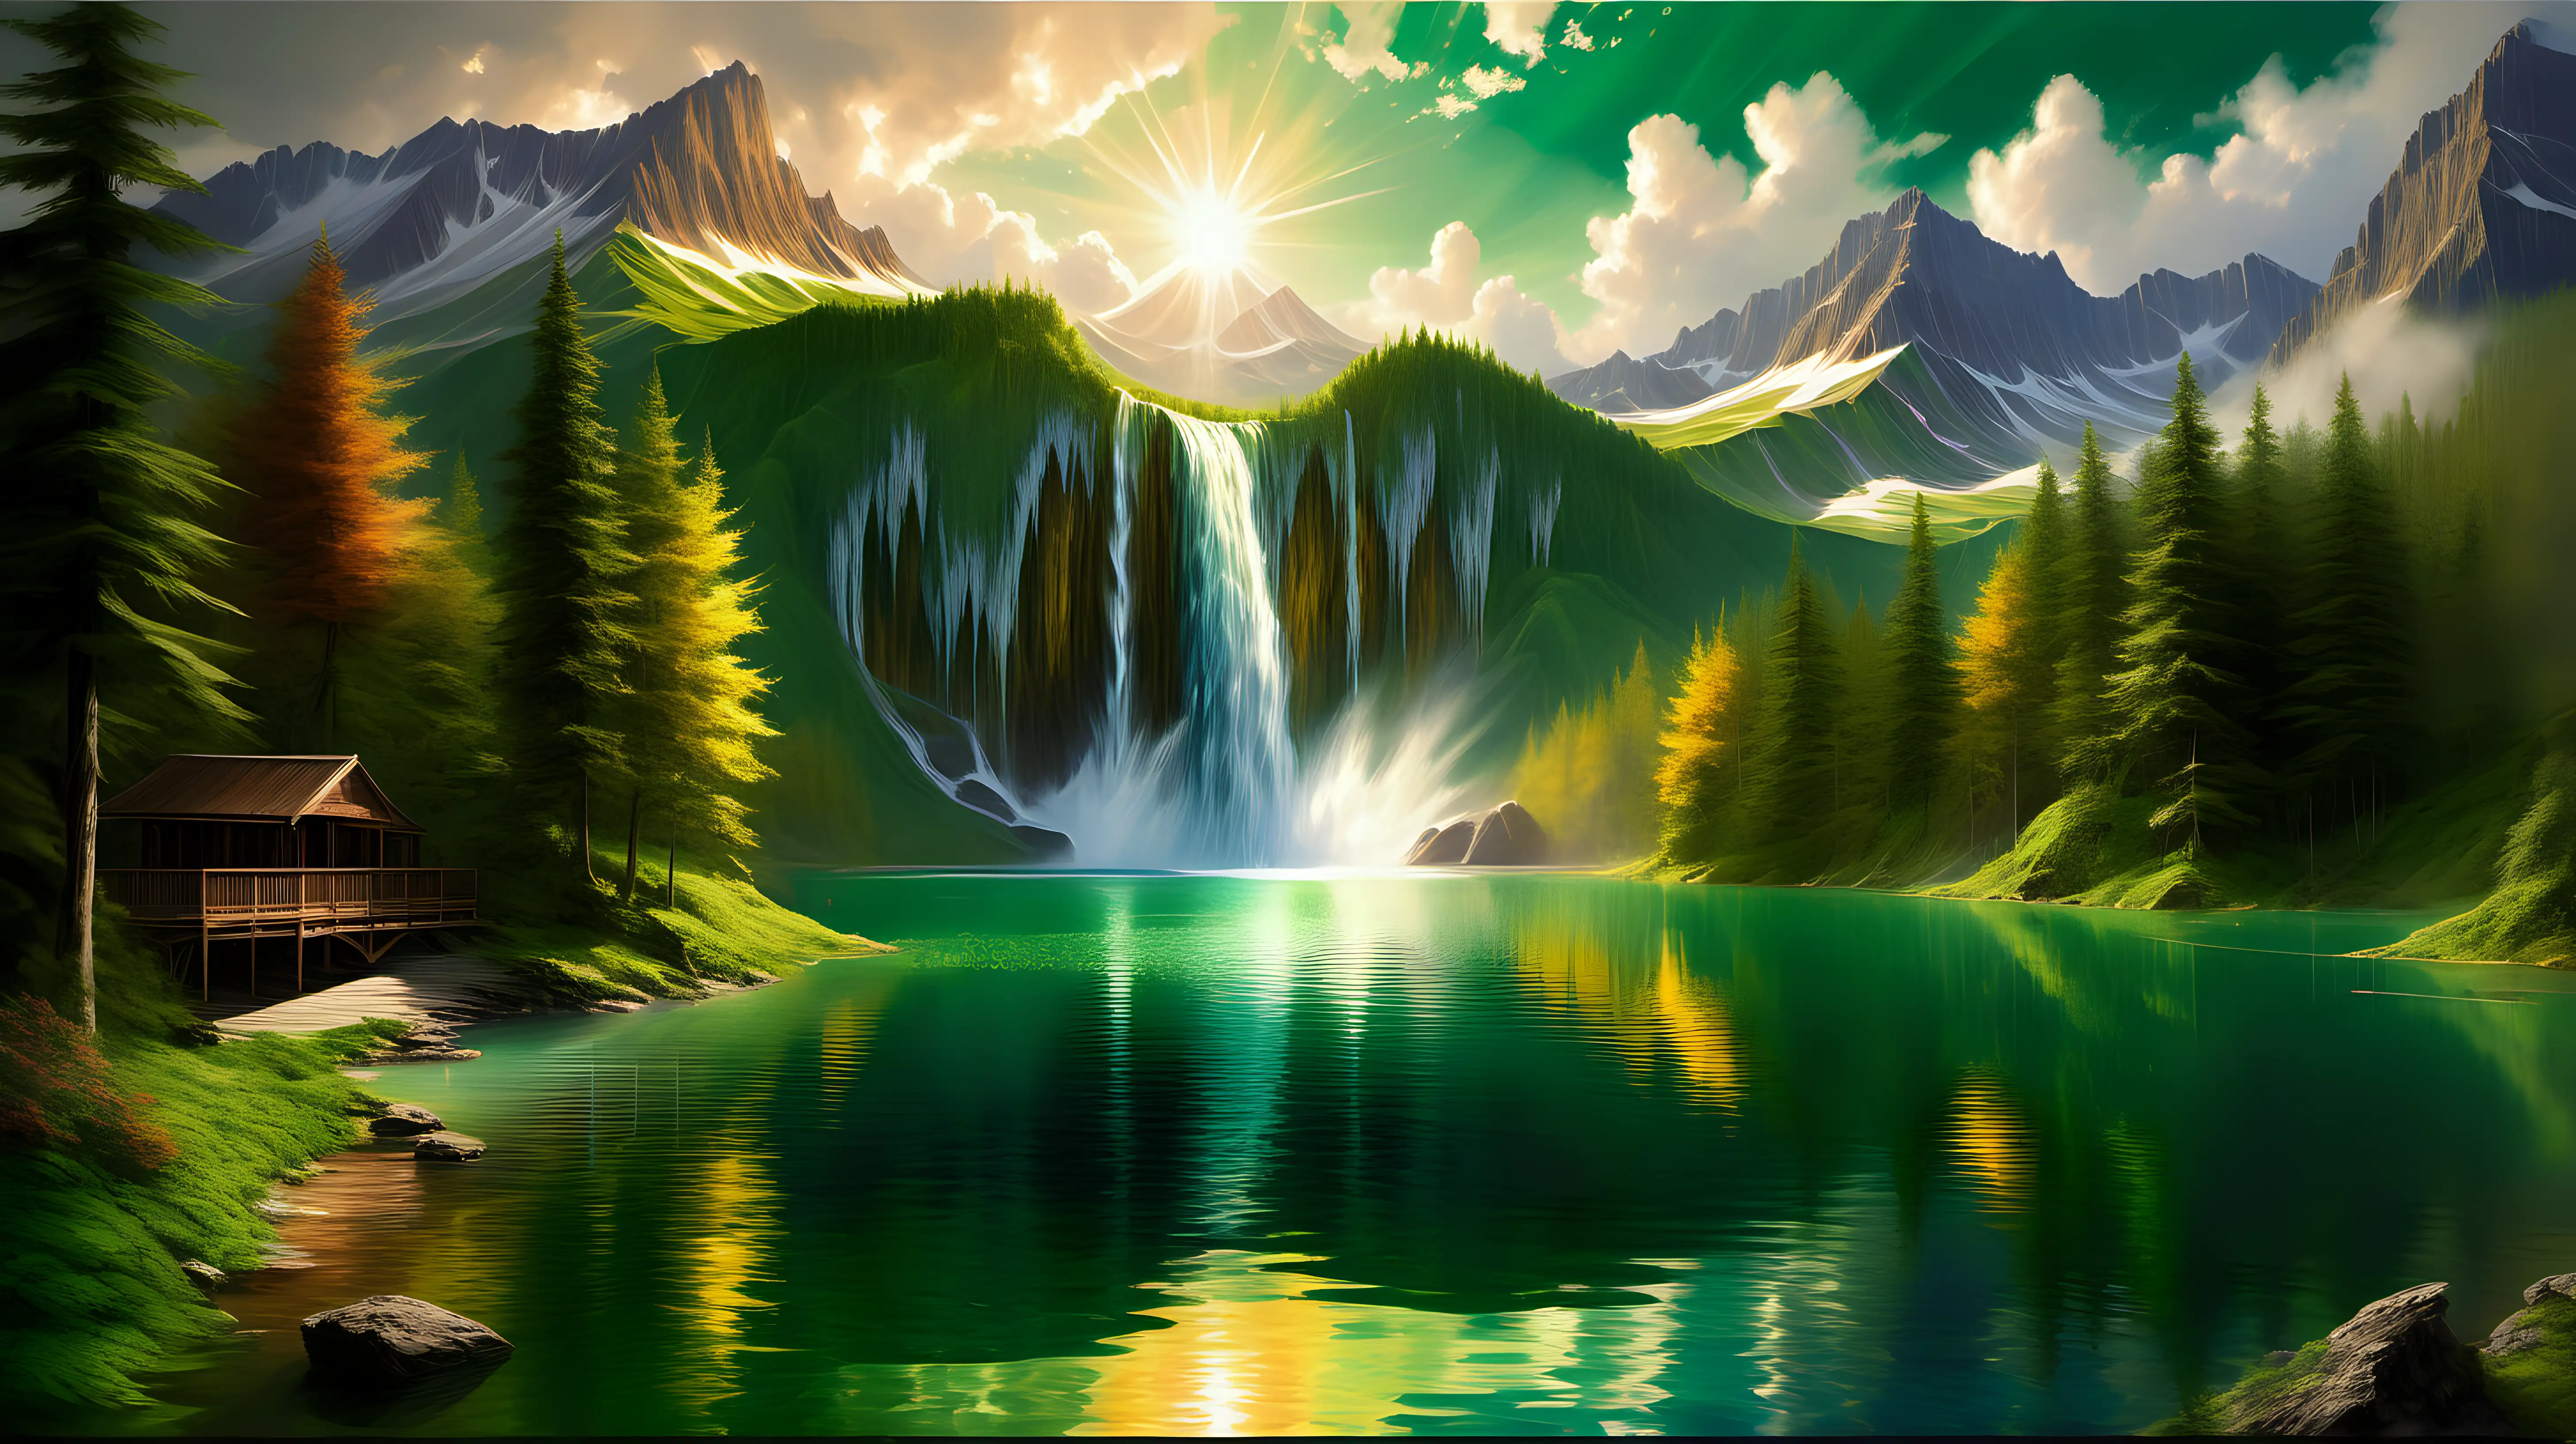 Spectacular Mountain Waterfall Landscape with Ultra Dimensioned Sunlight